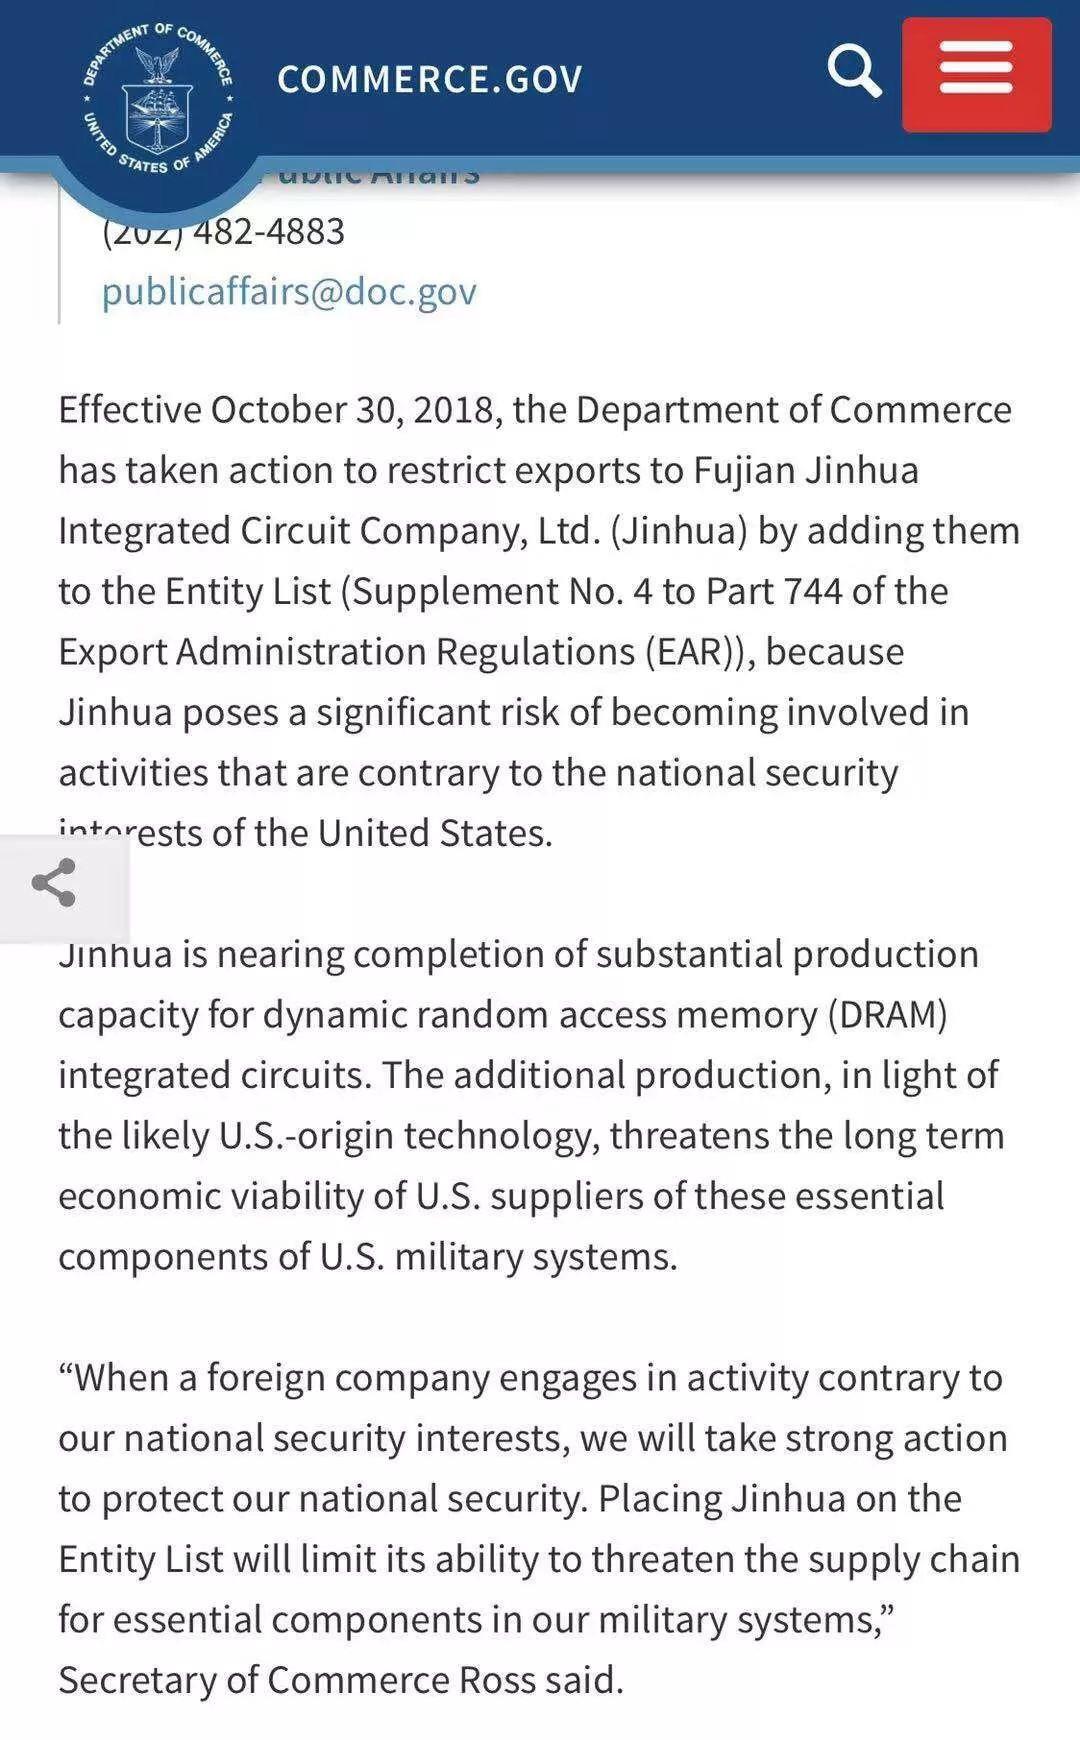 The United States imposed an emergency ban on the Fujian Jinhua Integrated Circuit.-SemiMedia